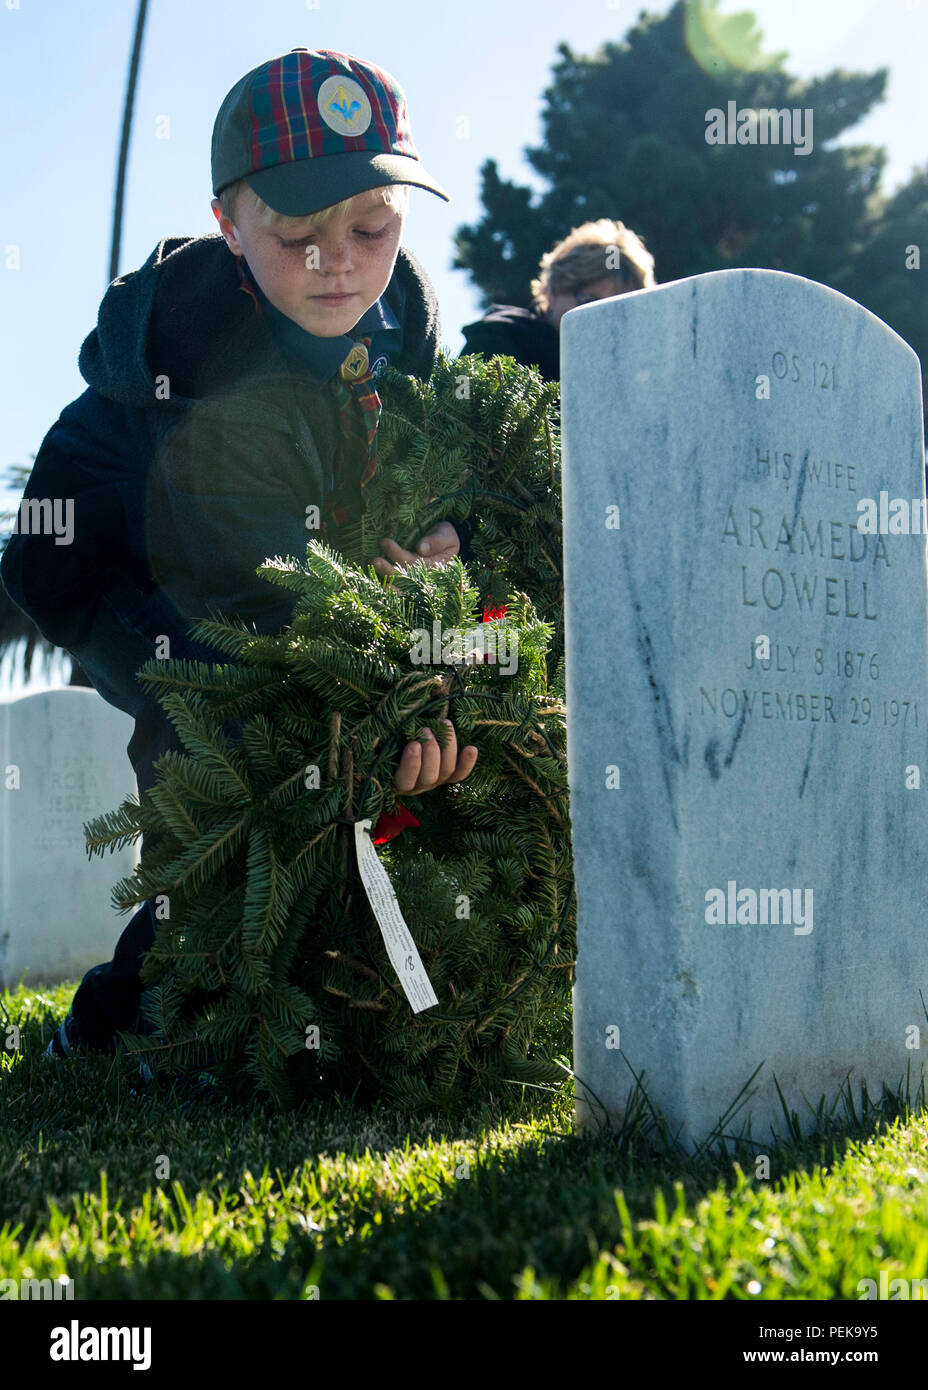 151212-N-QW941-191  SAN DIEGO (Dec. 12, 2015) An American Boy Scout lays a wreath on the tombstone of a fallen military member at Fort Rosecran’s National Cemetery during the Wreaths Across America ceremony. Wreaths Across America is an annual event that takes place in multiple locations where volunteers lay wreaths on tombstones of fallen military members. (U.S. Navy photo by Mass Communication Specialist 3rd Class Trevor Kohlrus/Released) Stock Photo